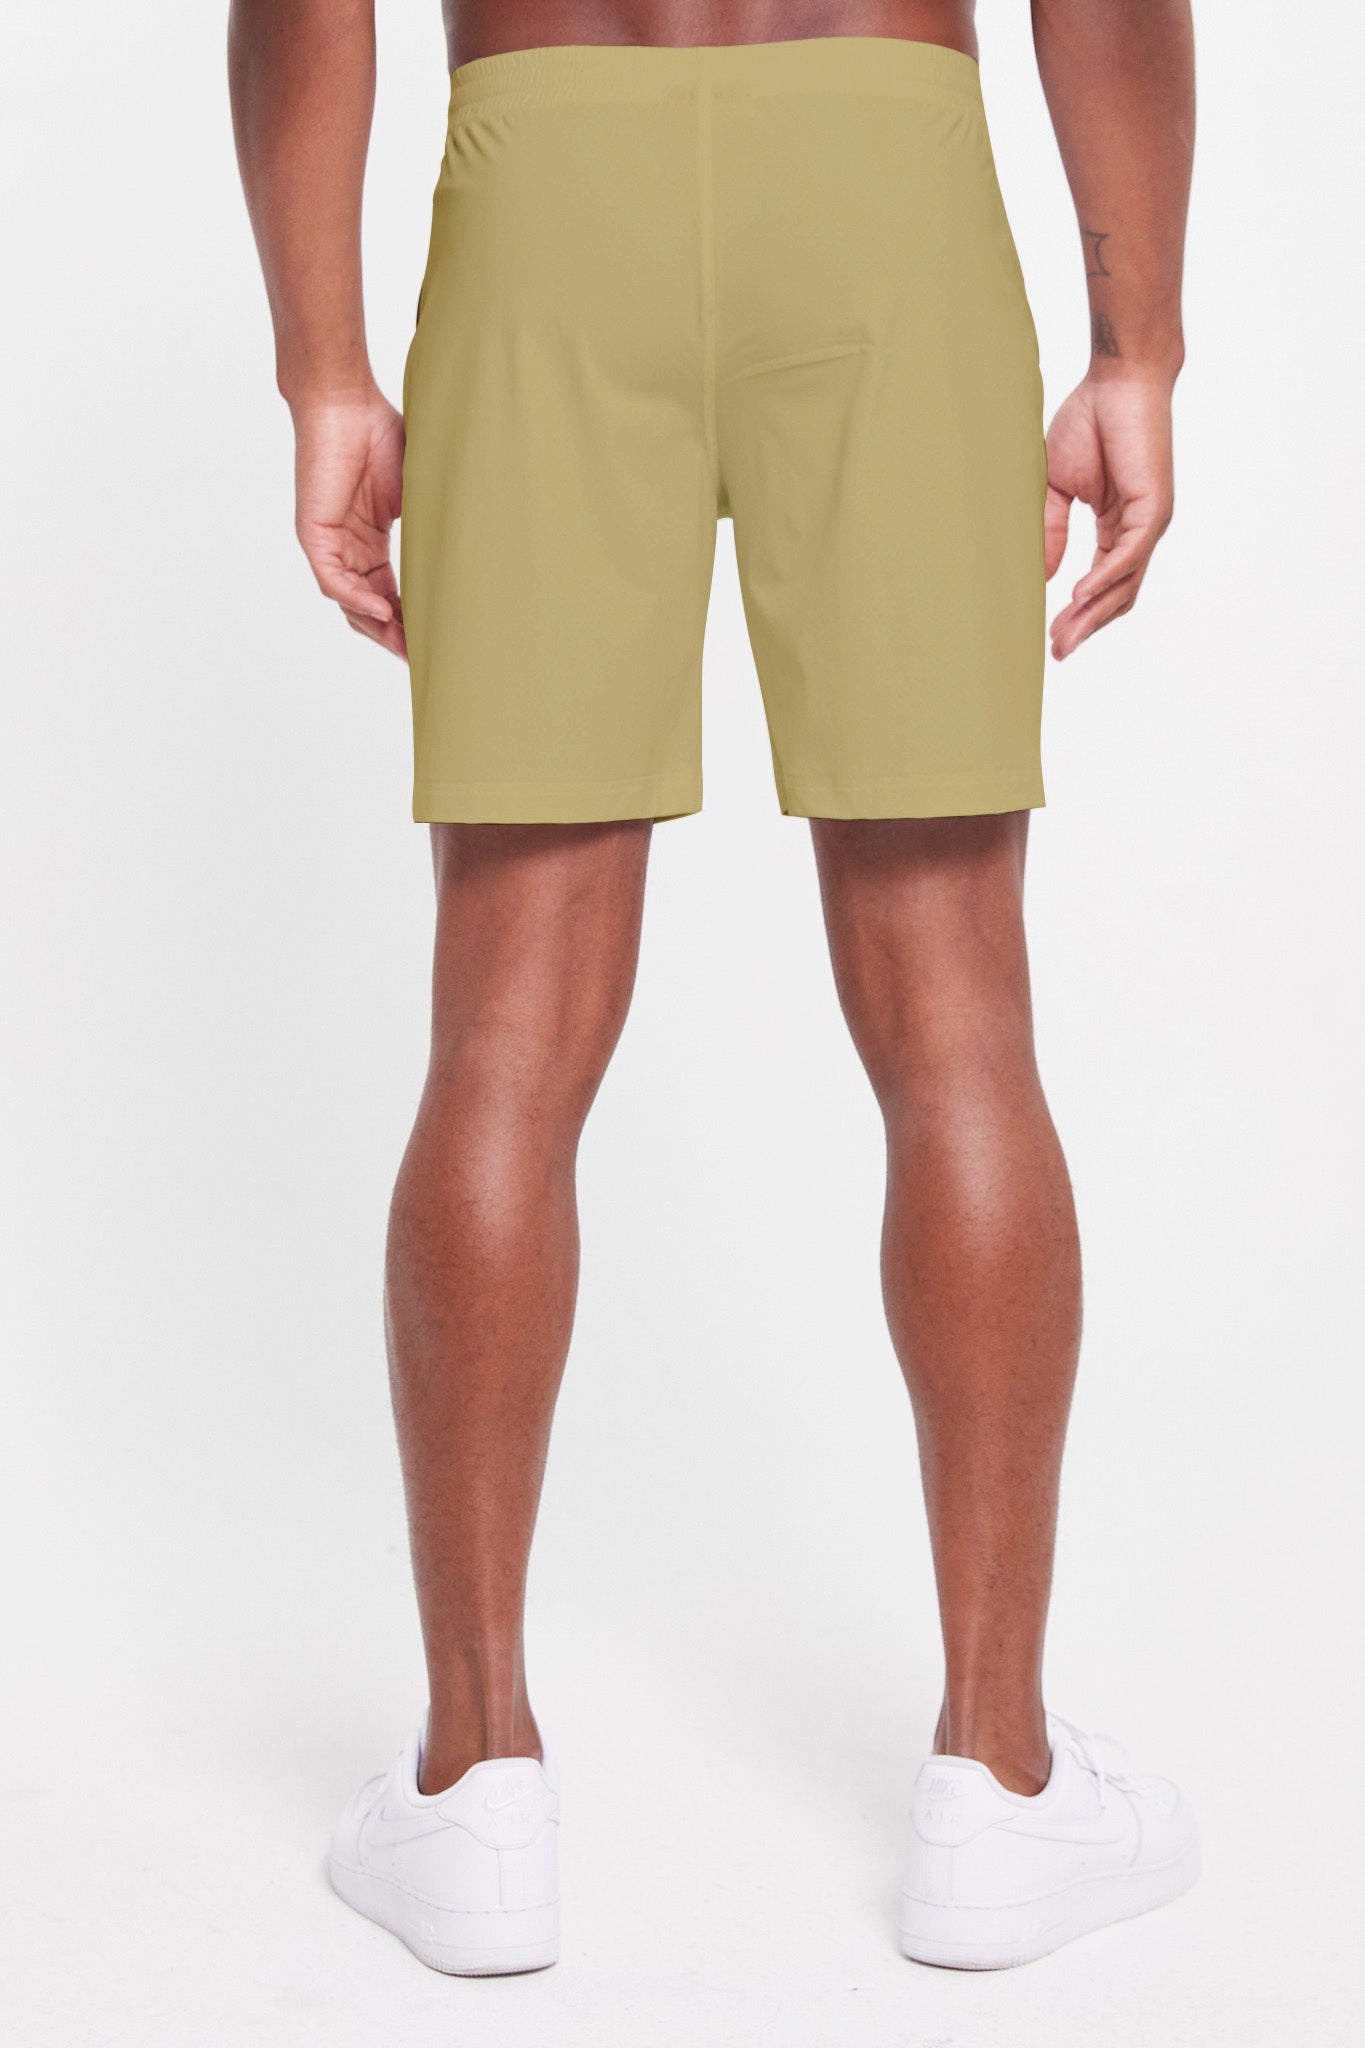 Image of the byron tennis short in calliste green